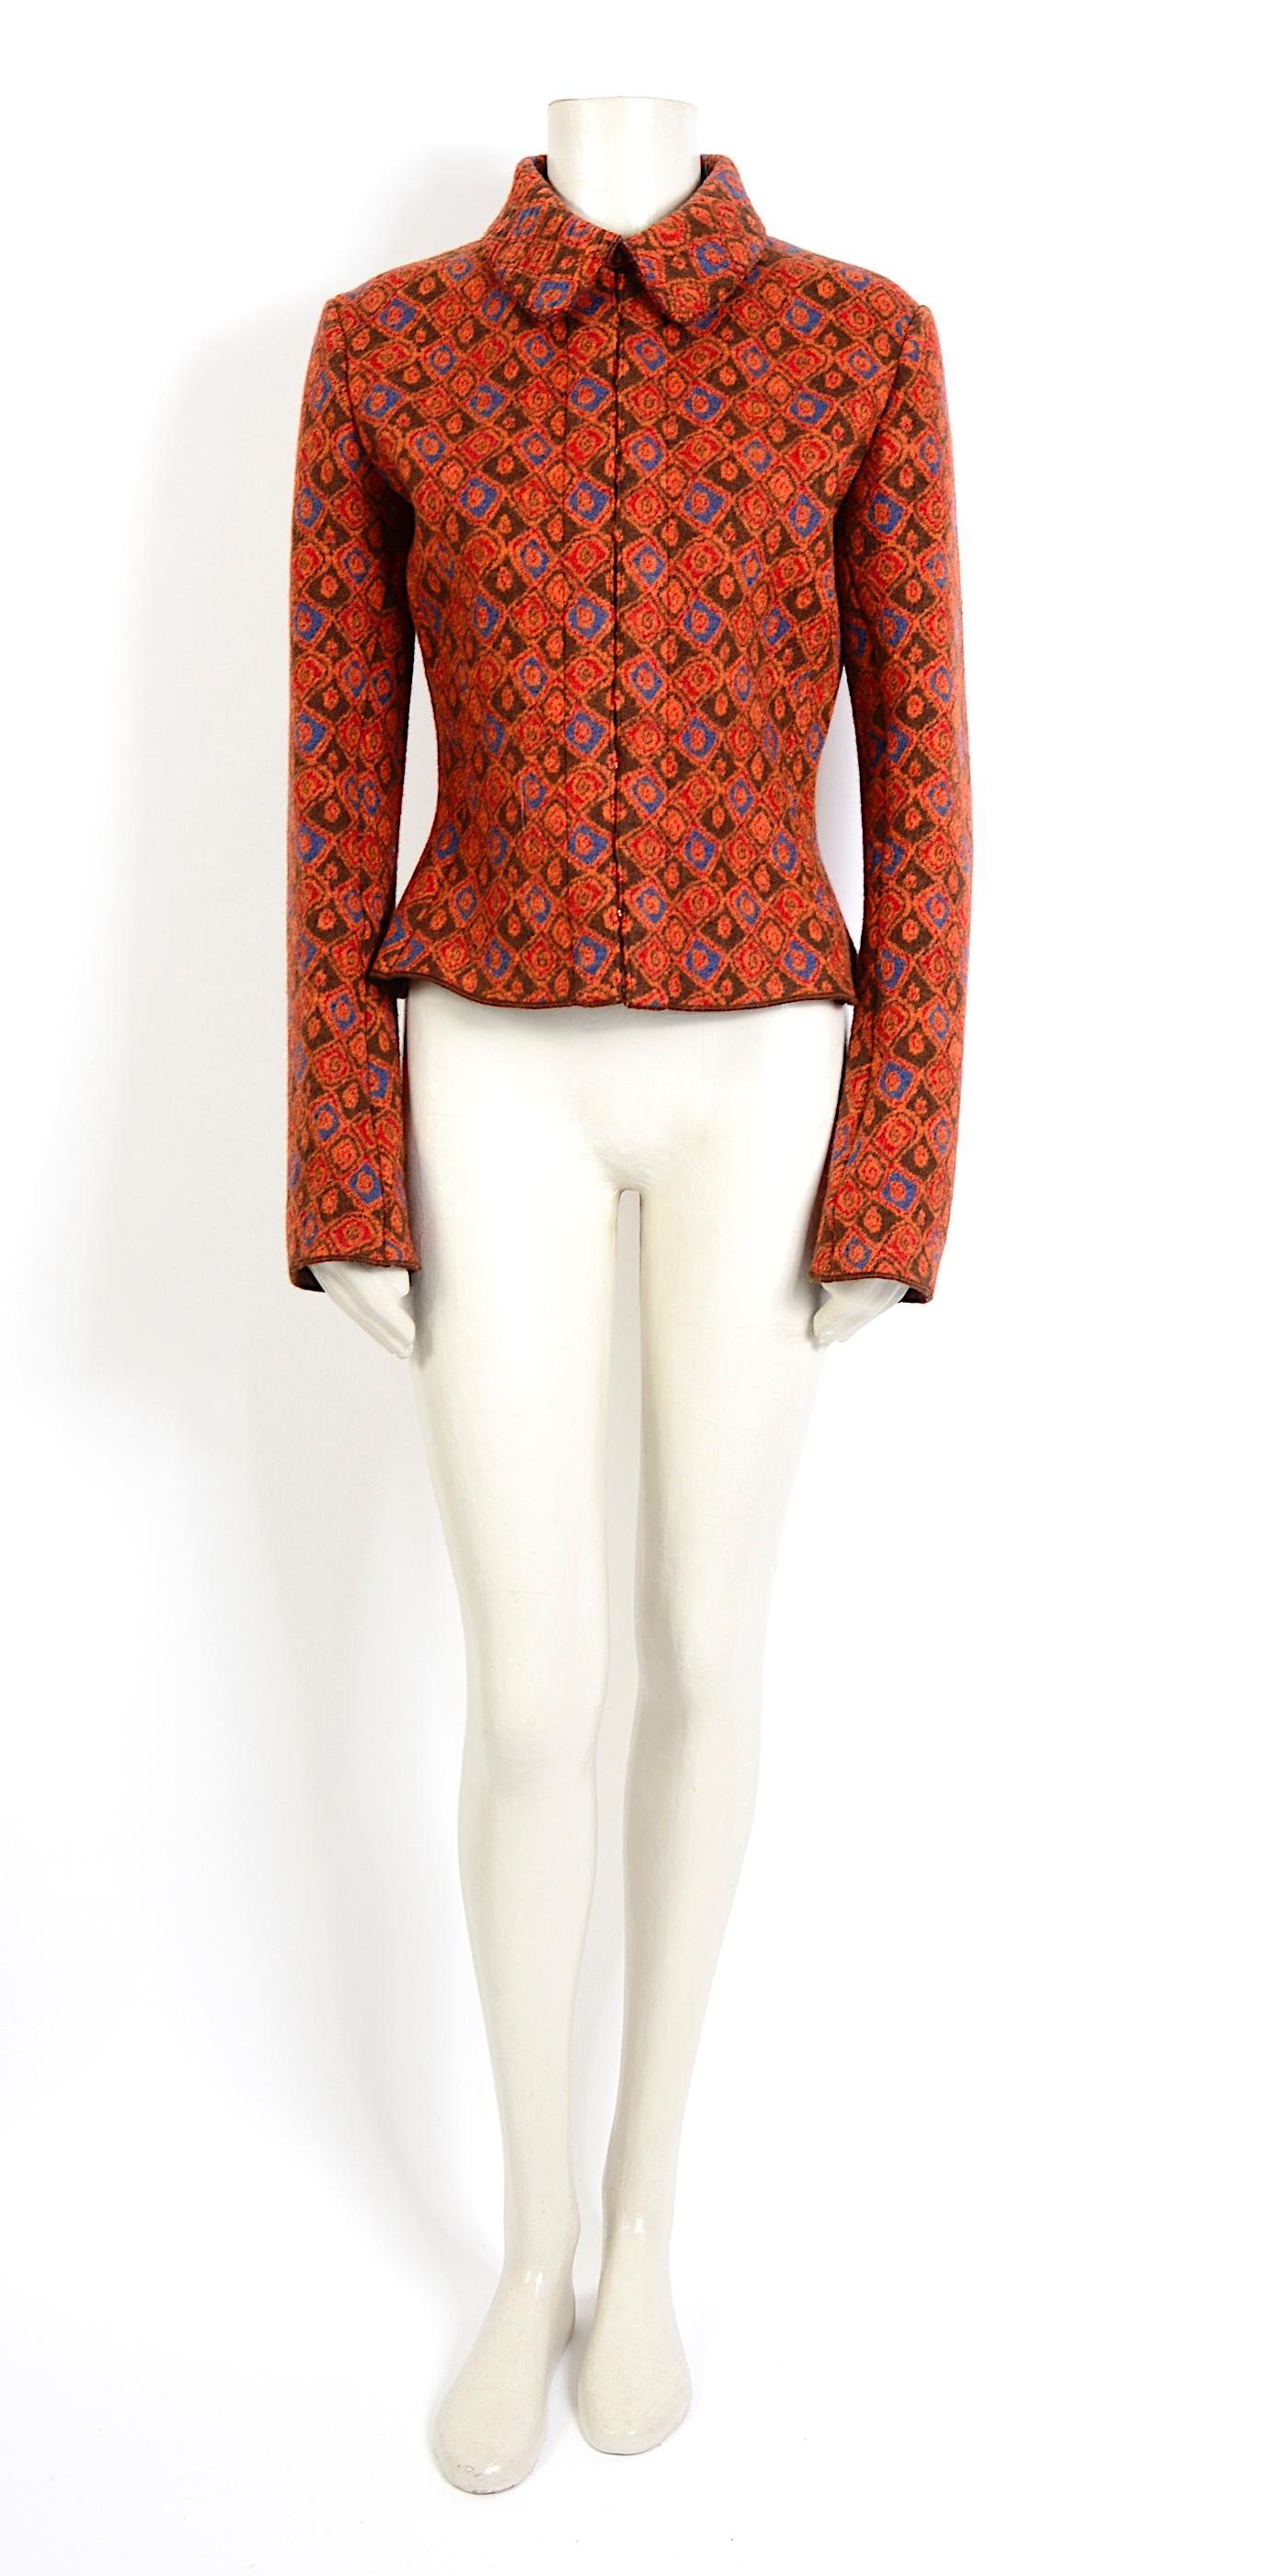 Complete every look with this amazing rusted orange pattern Alaia jacket by Azzedine Alaia. 
Circa 1990s, Timeless and chic, this Alaia will pair perfectly with your favorite jeans or skirt. 
Marked a size M.
Measurements are taken flat:
Sh to Sh